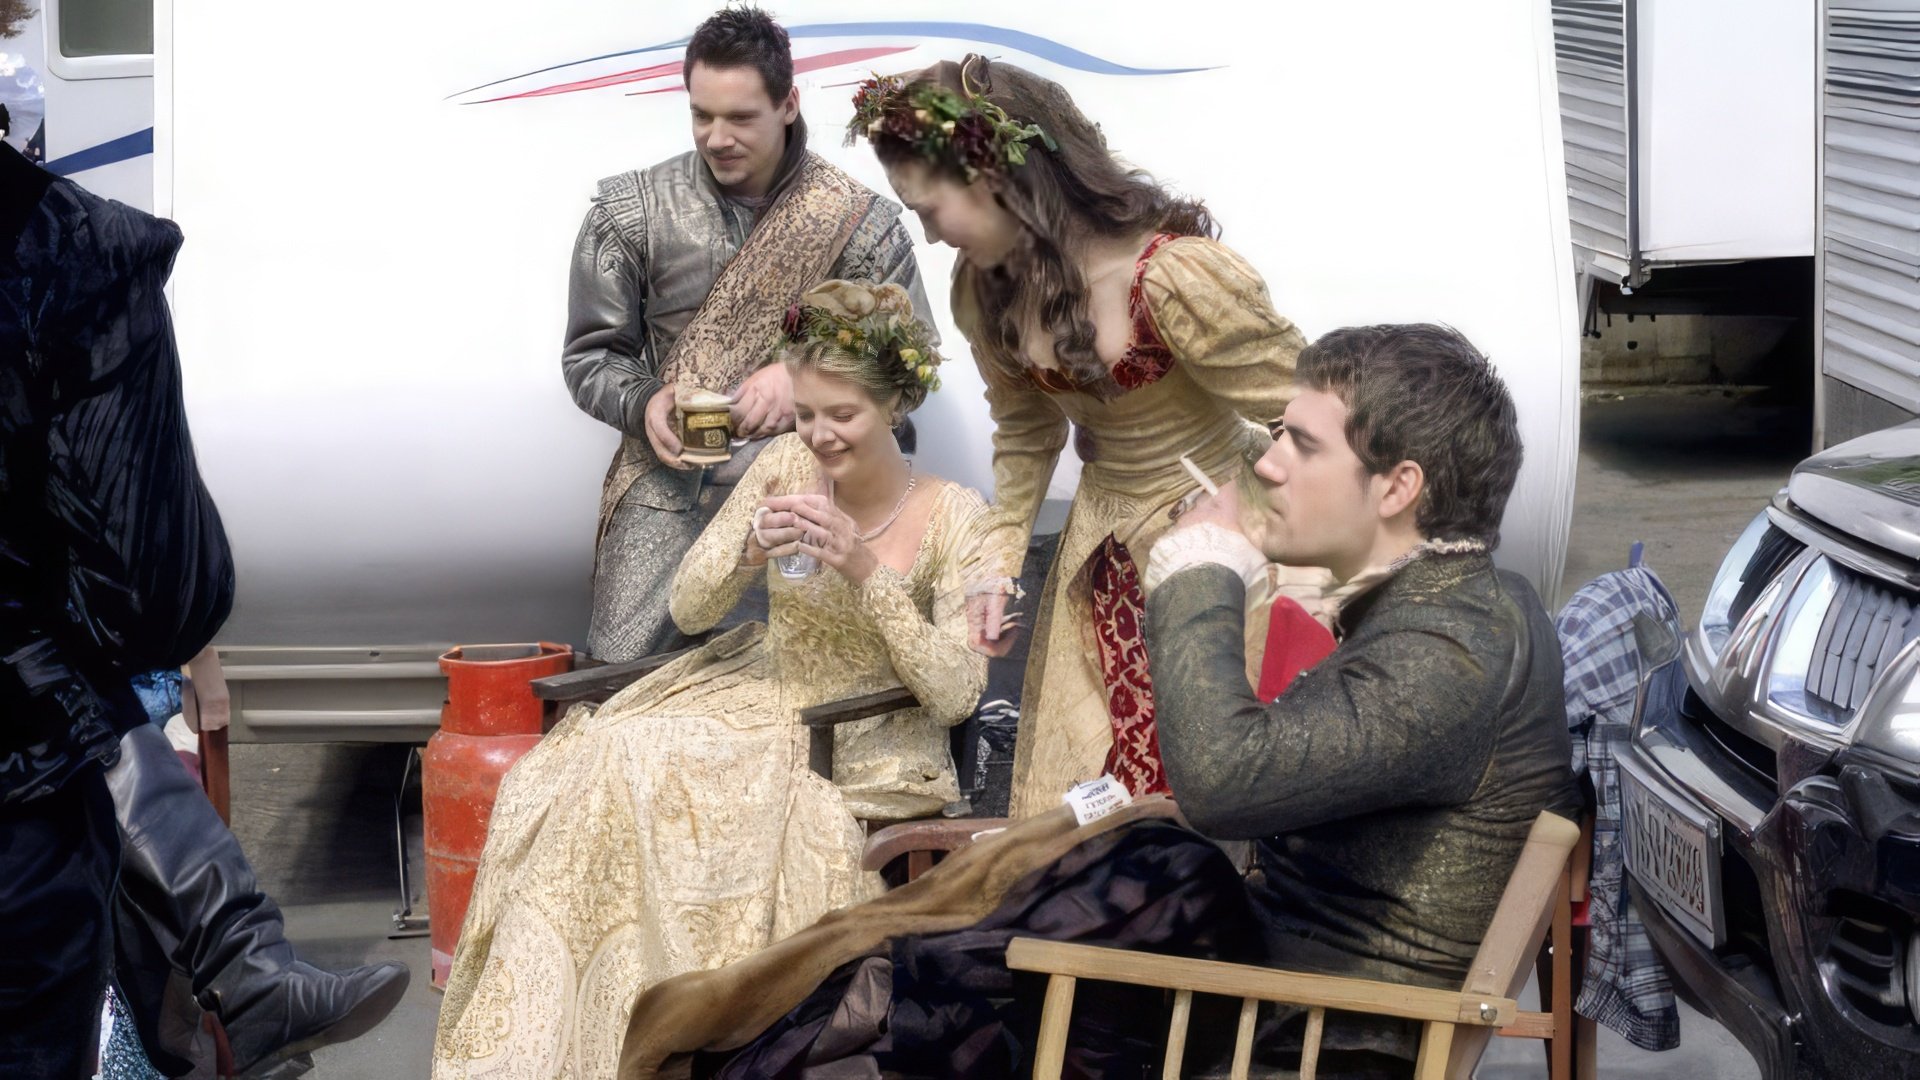 “The Tudors”: Henry Cavill takes a break in-between the takes